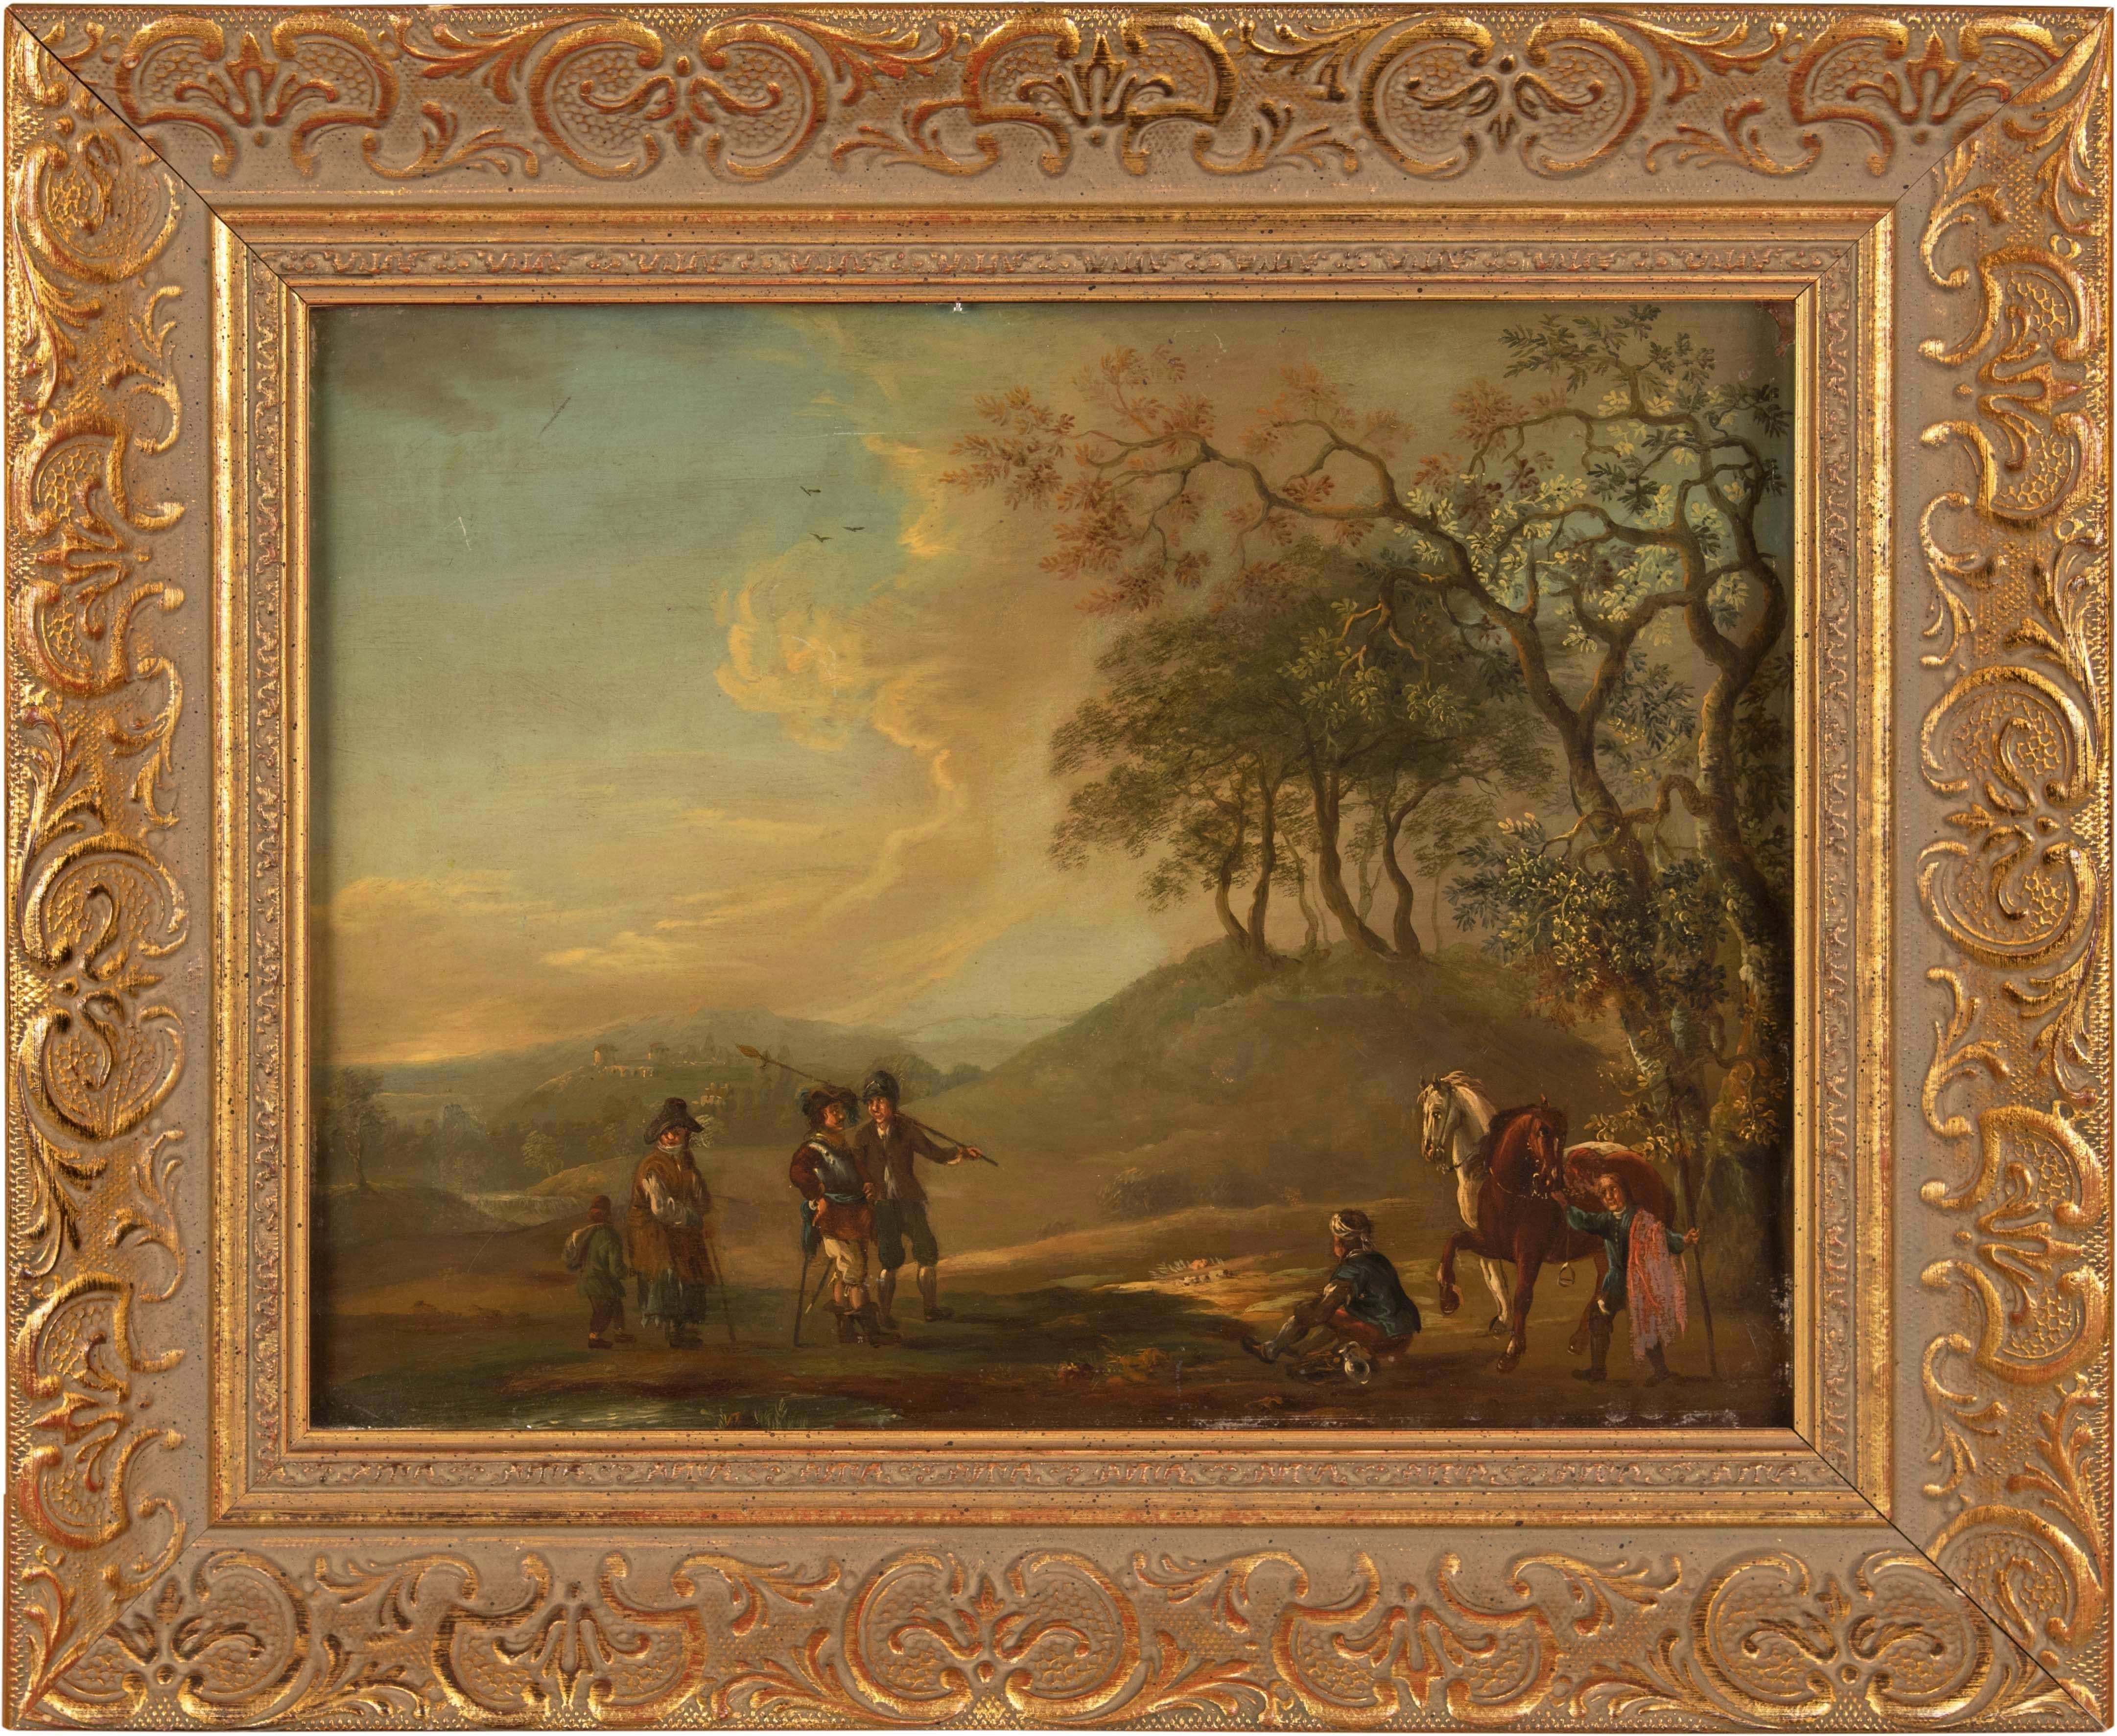 Unknown Landscape Painting - 18th century Dutch landscape painting - Travelers - Oil on copper frame